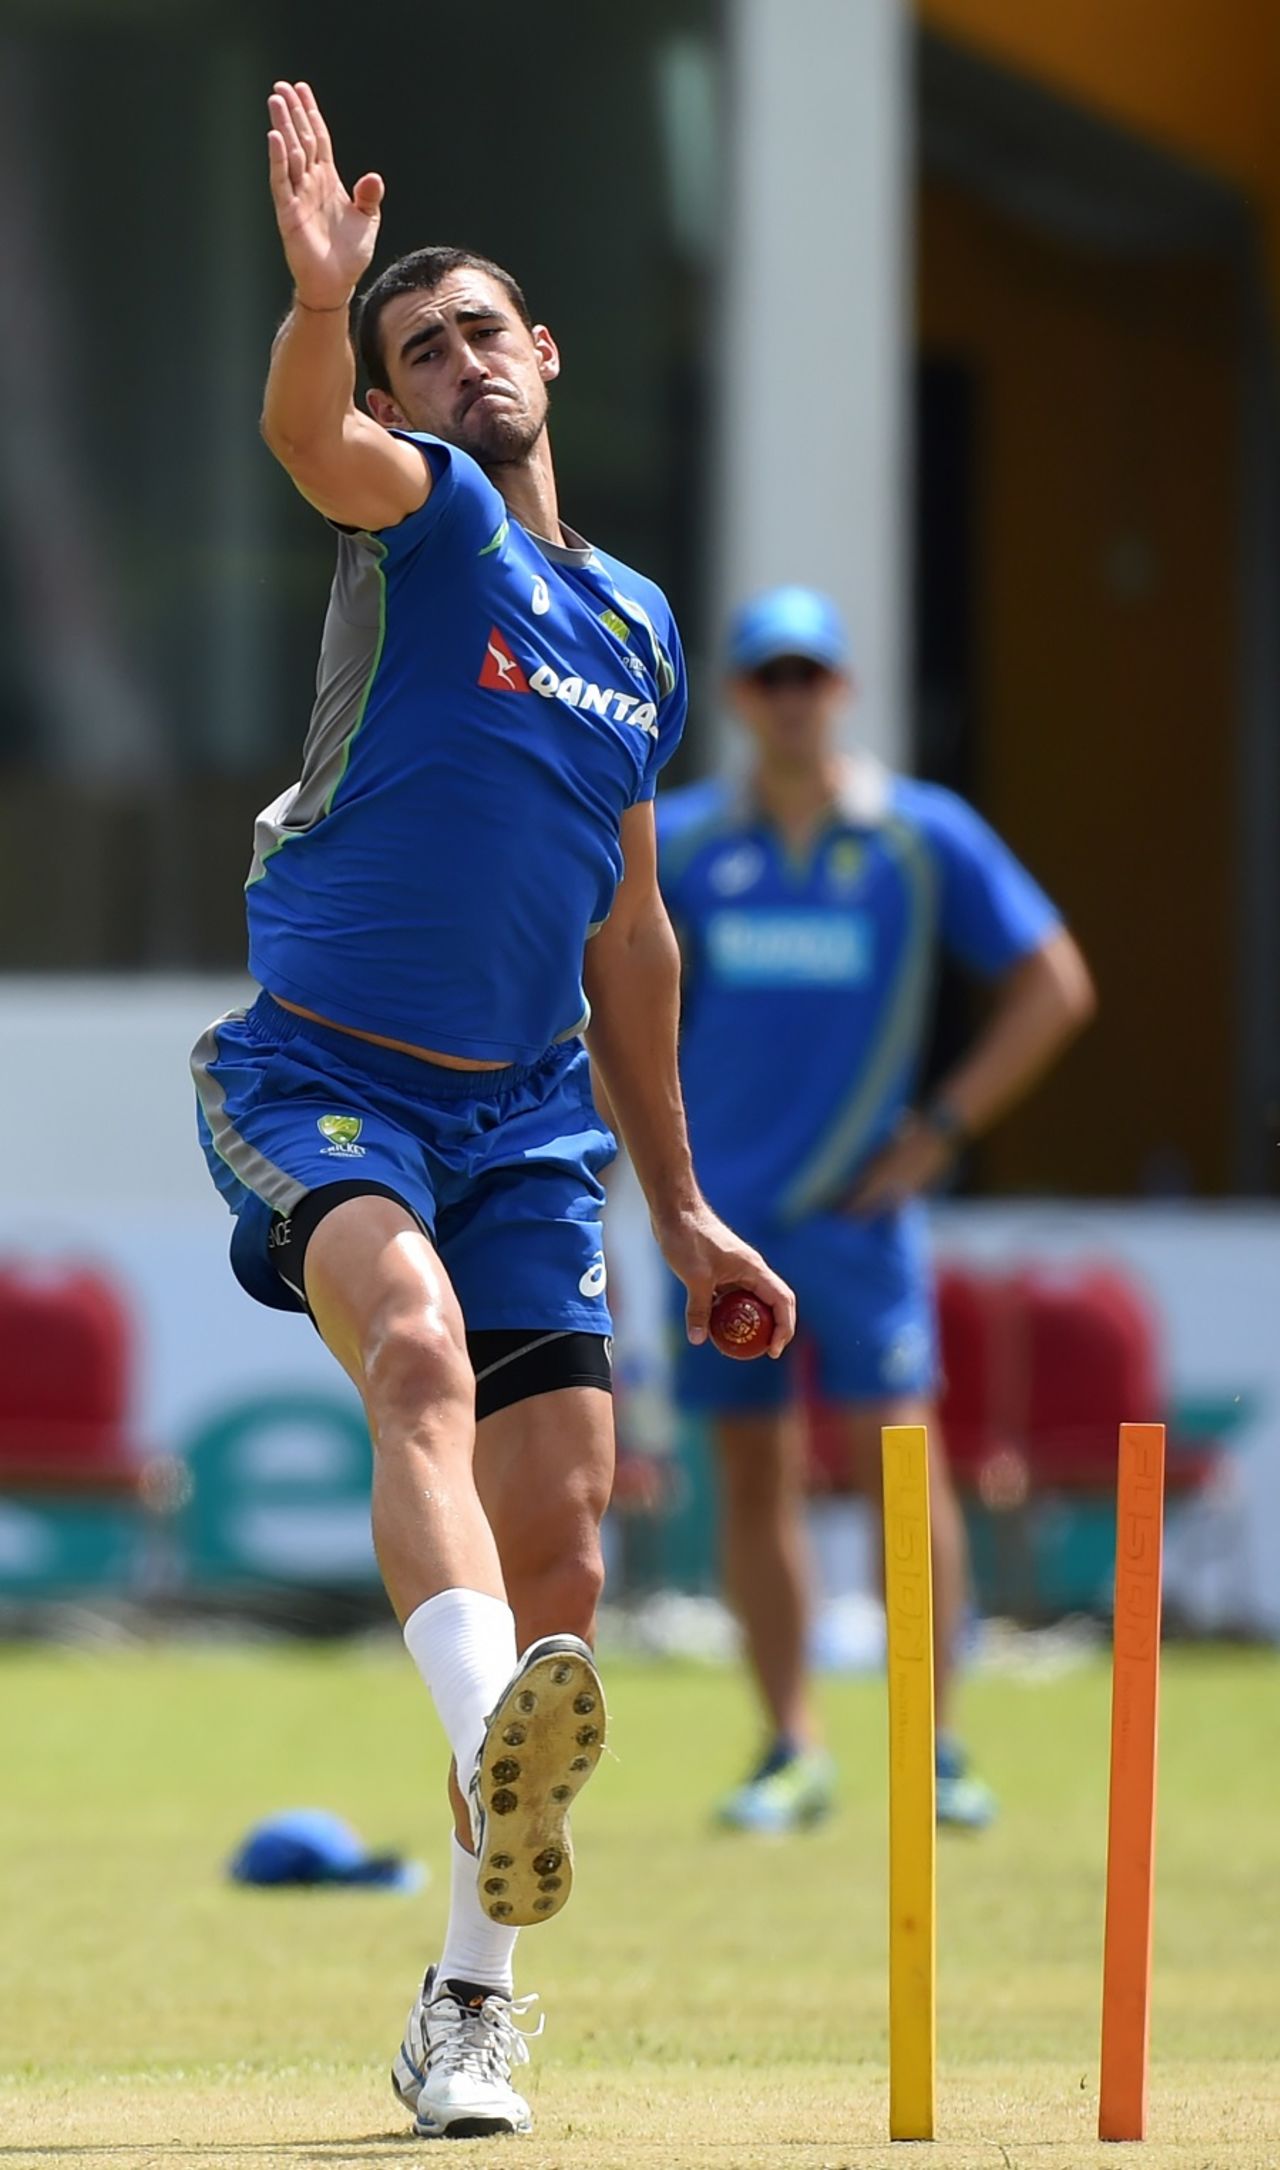 Mitchell Starc prepares to deliver the ball during training, Galle, August 2, 2016